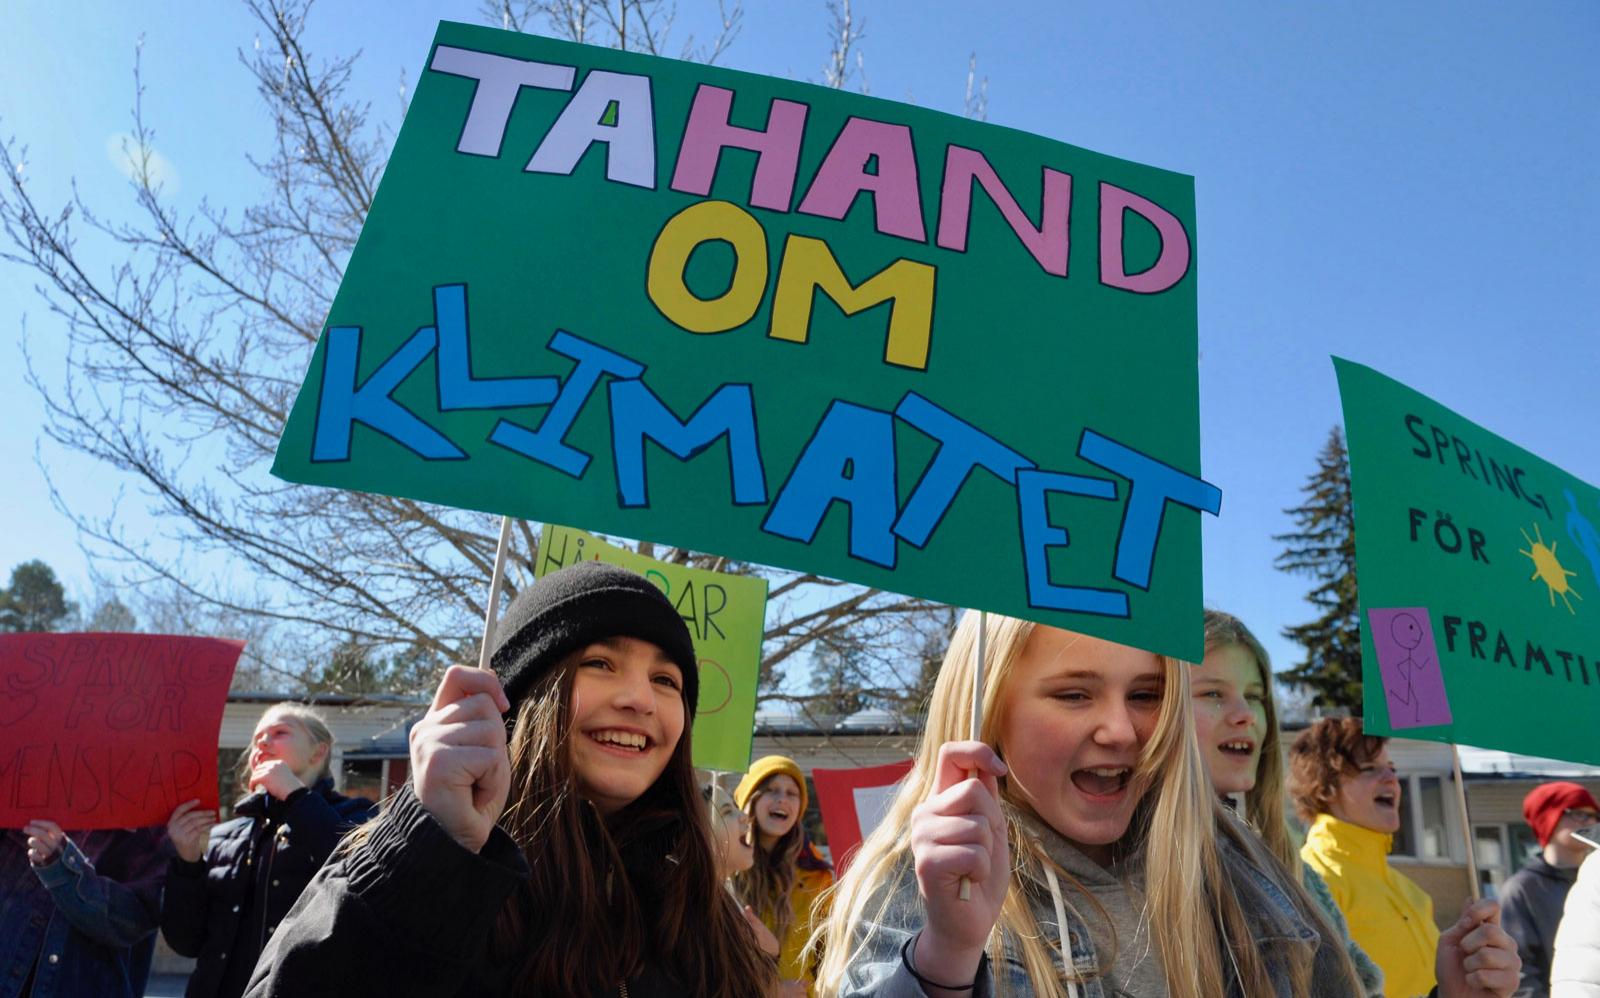 Girls holding sign: Stop Climat Change